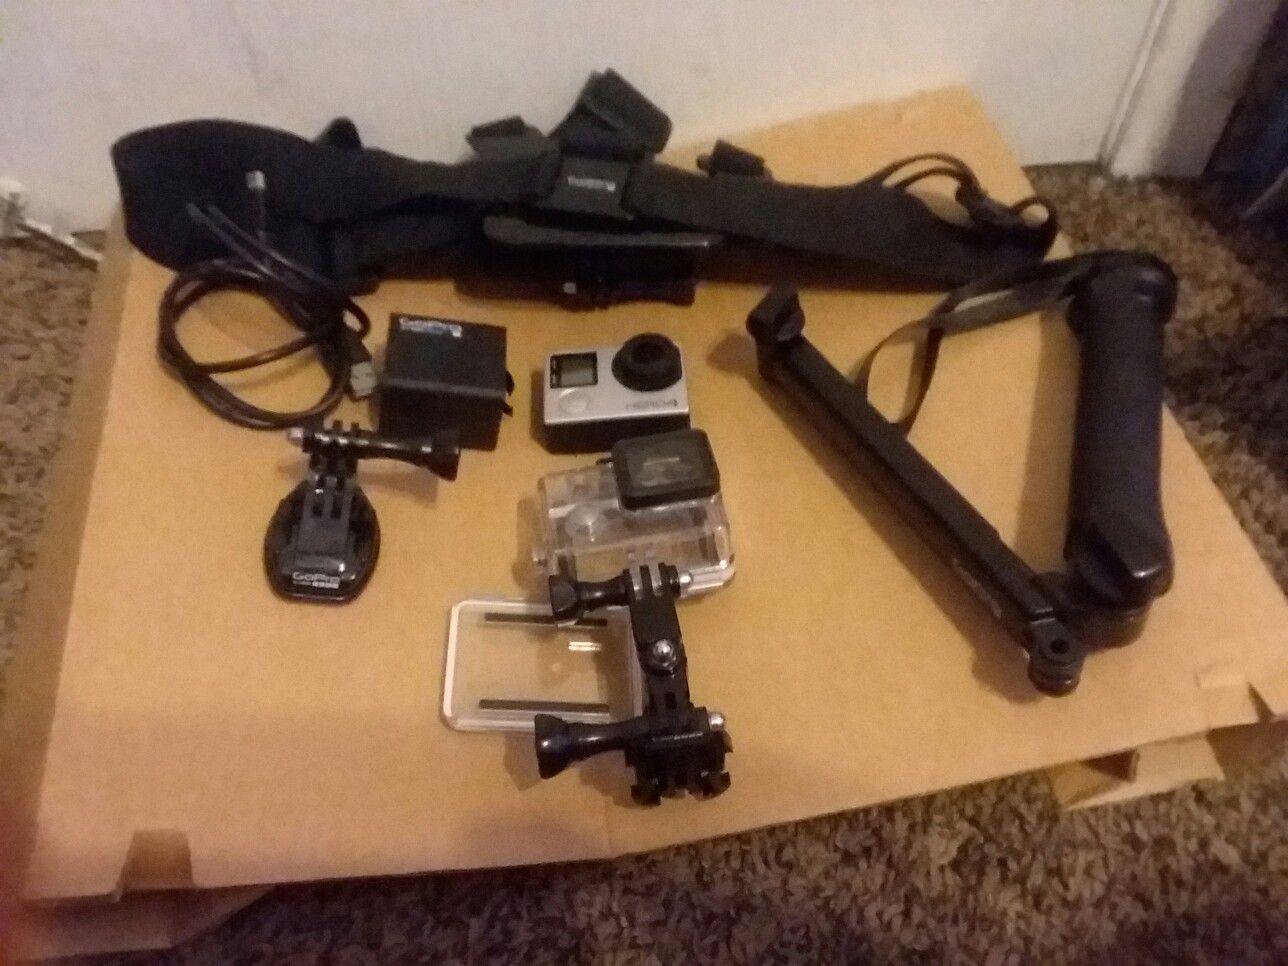 GO PRO HERO 4 Video Camera With 2 Batteries and Accessories